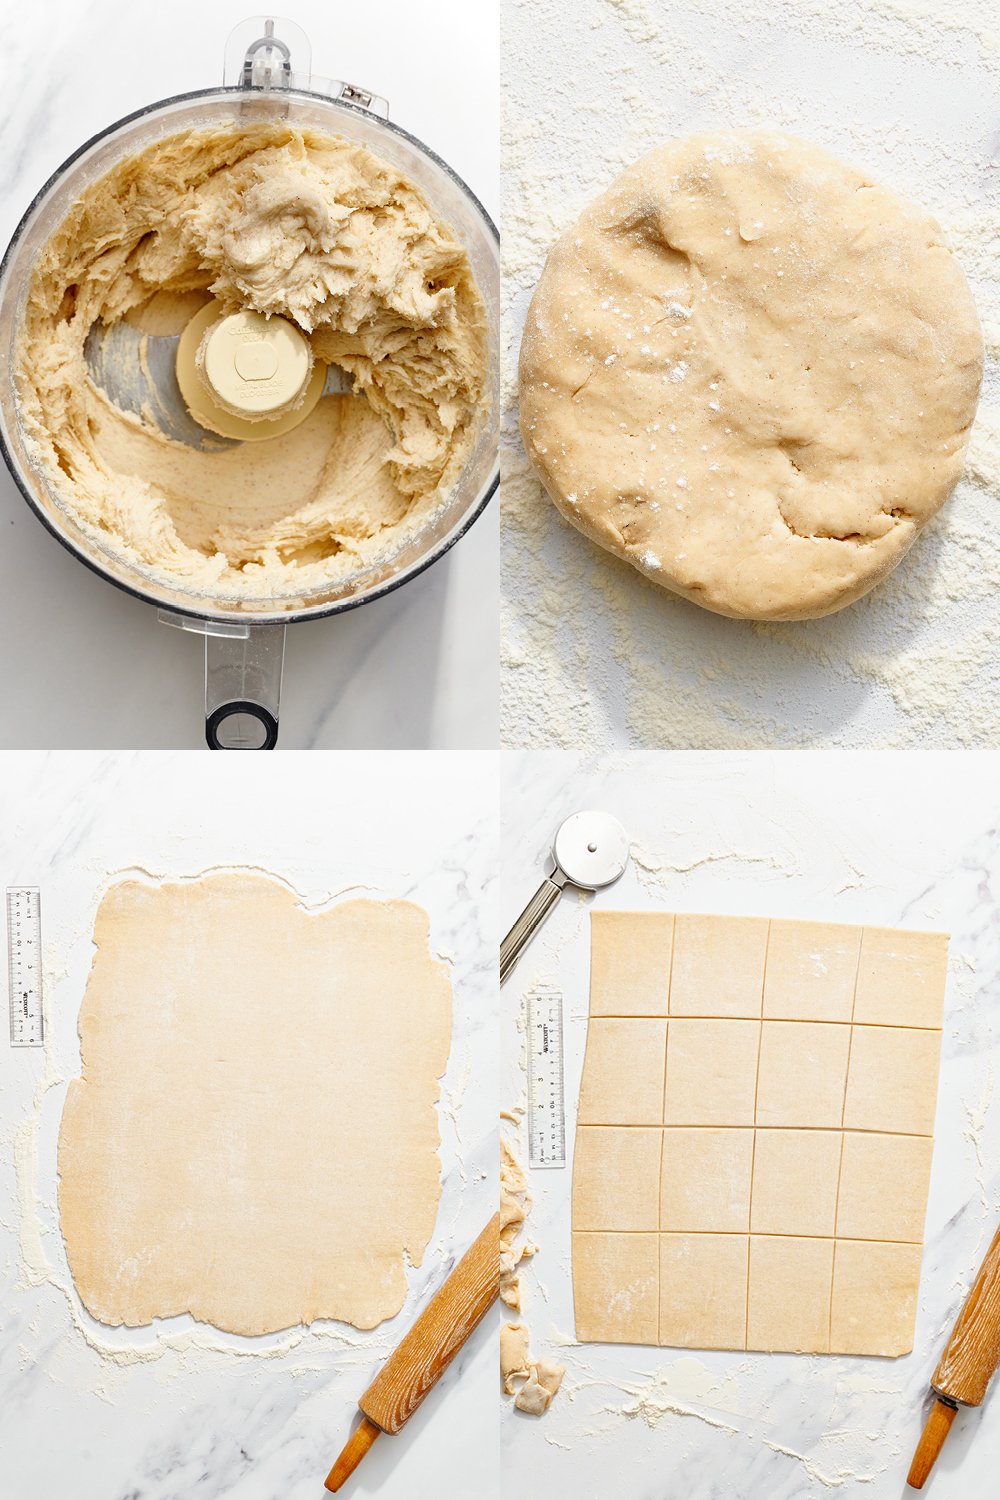 step-by-step photos showing how to make the dough in a food processor and roll it out.